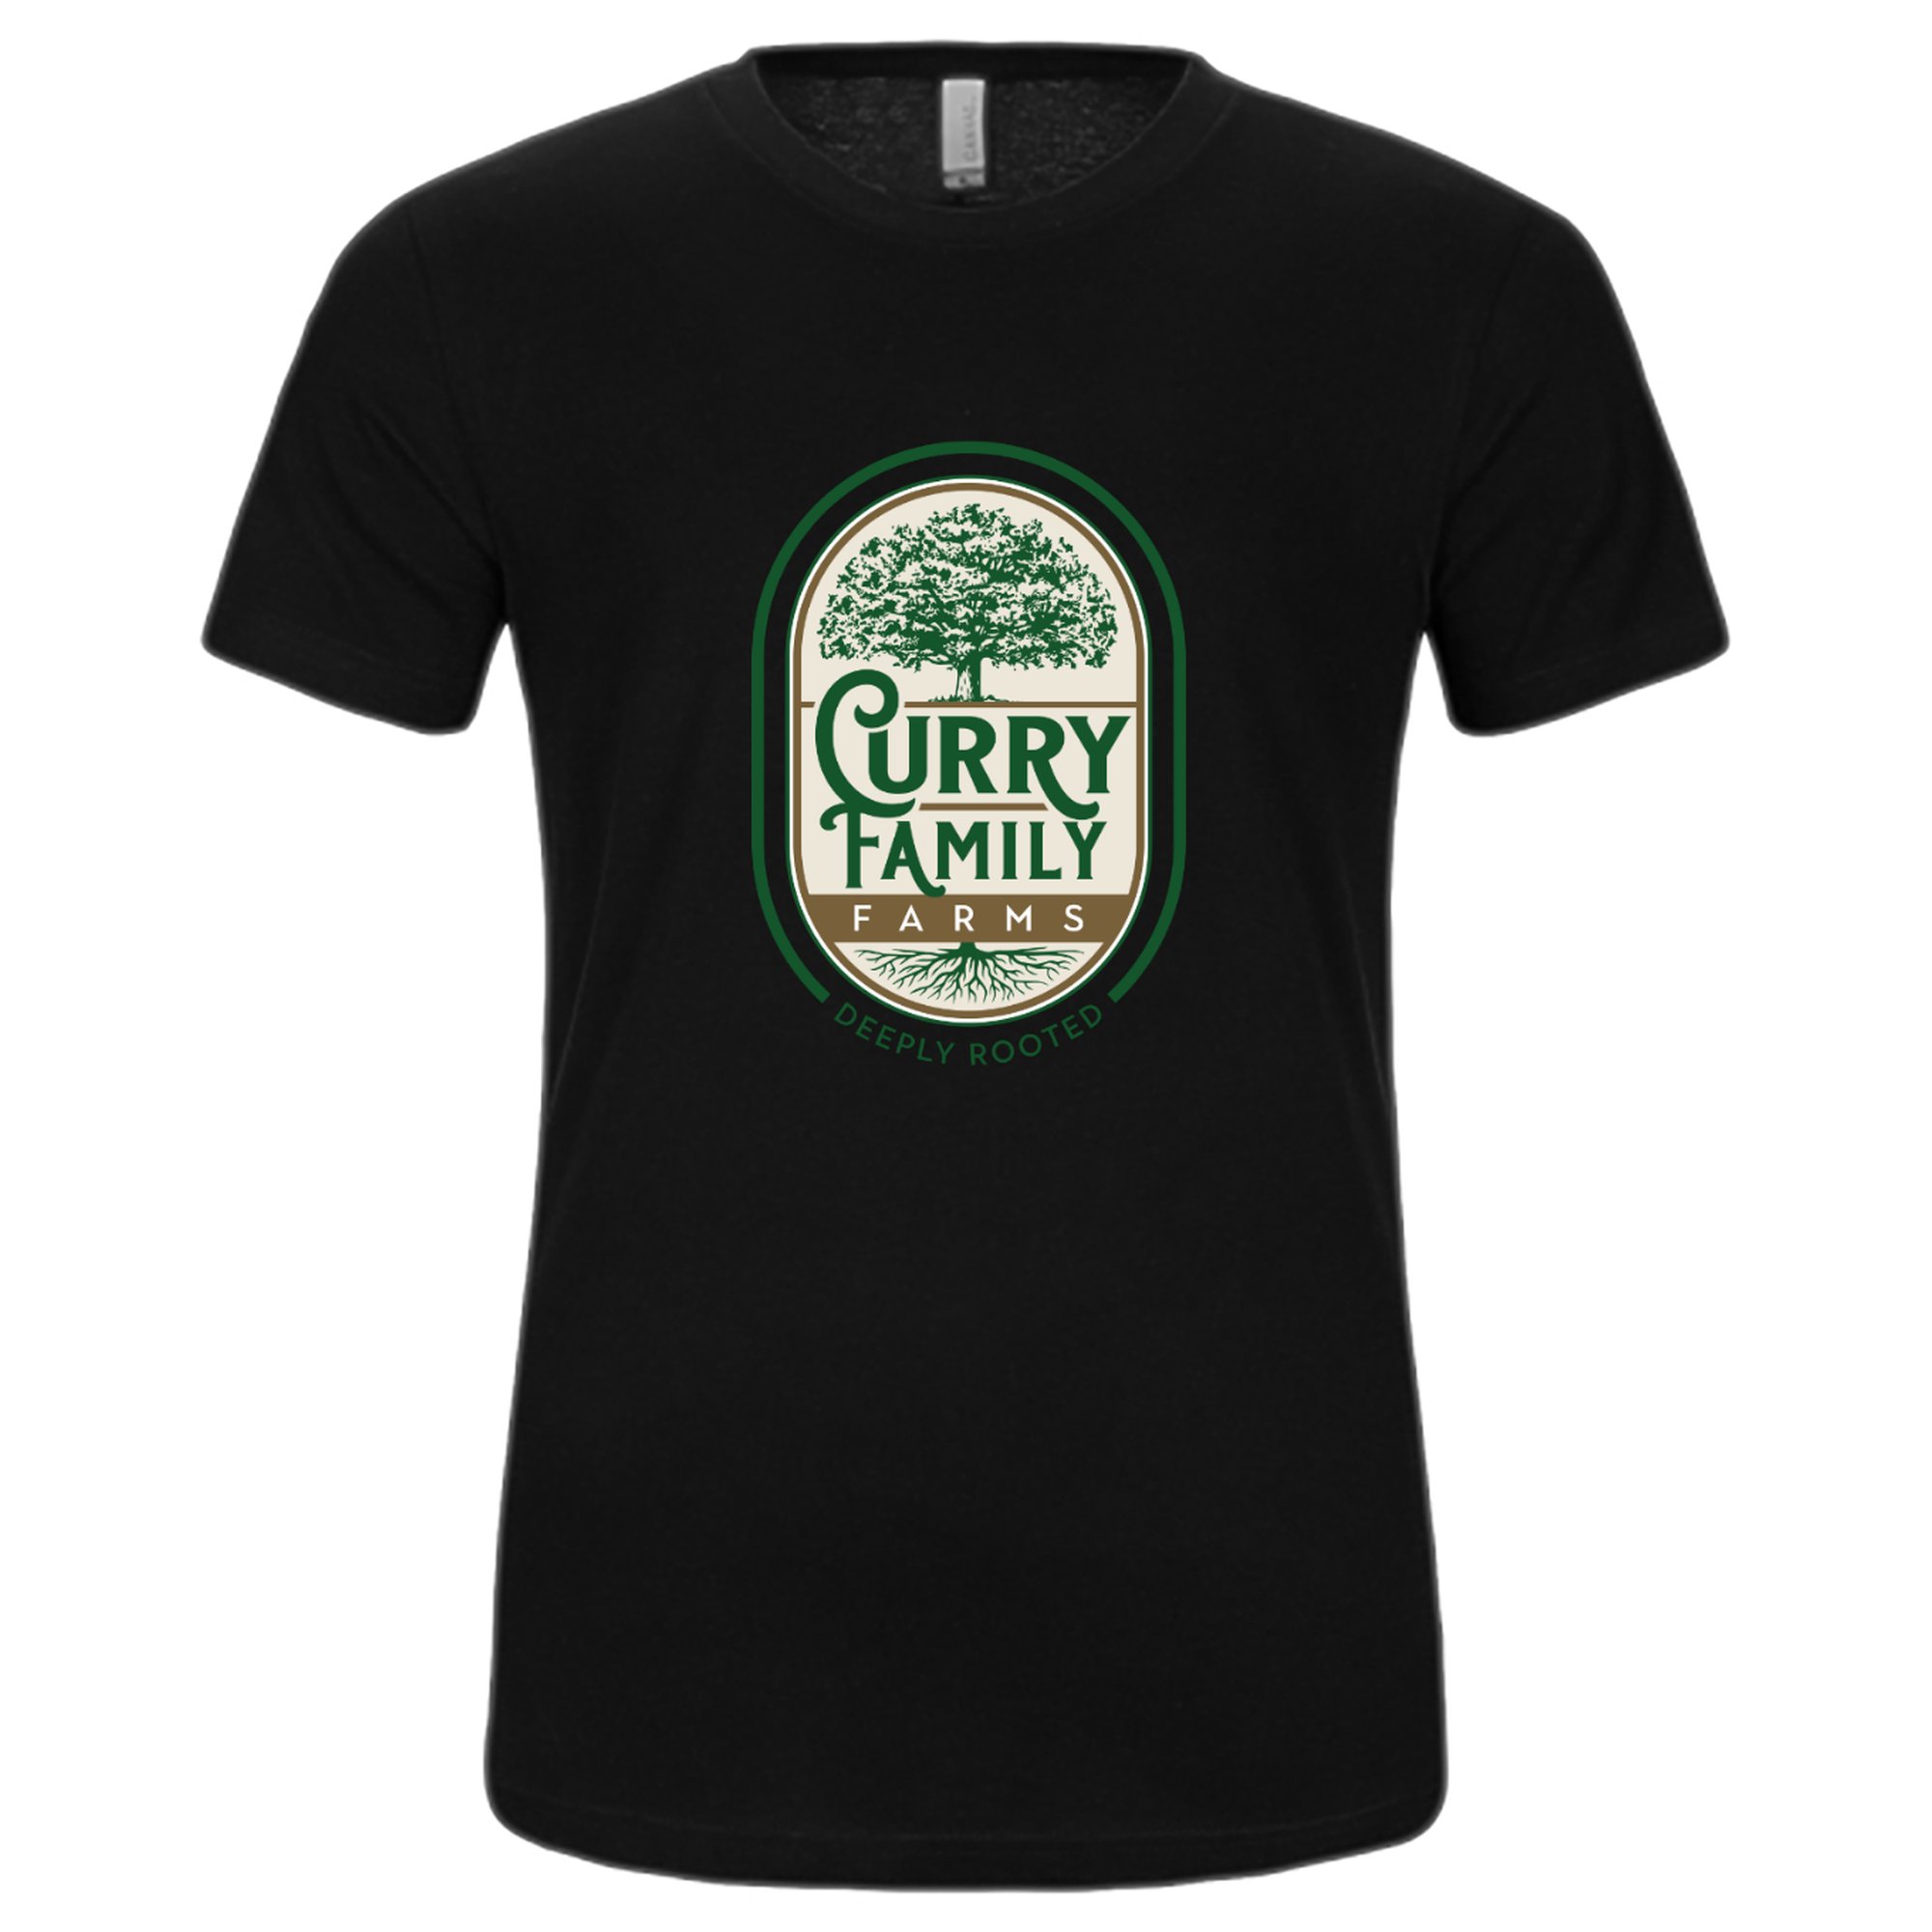 Curry Farms T-Shirt Small